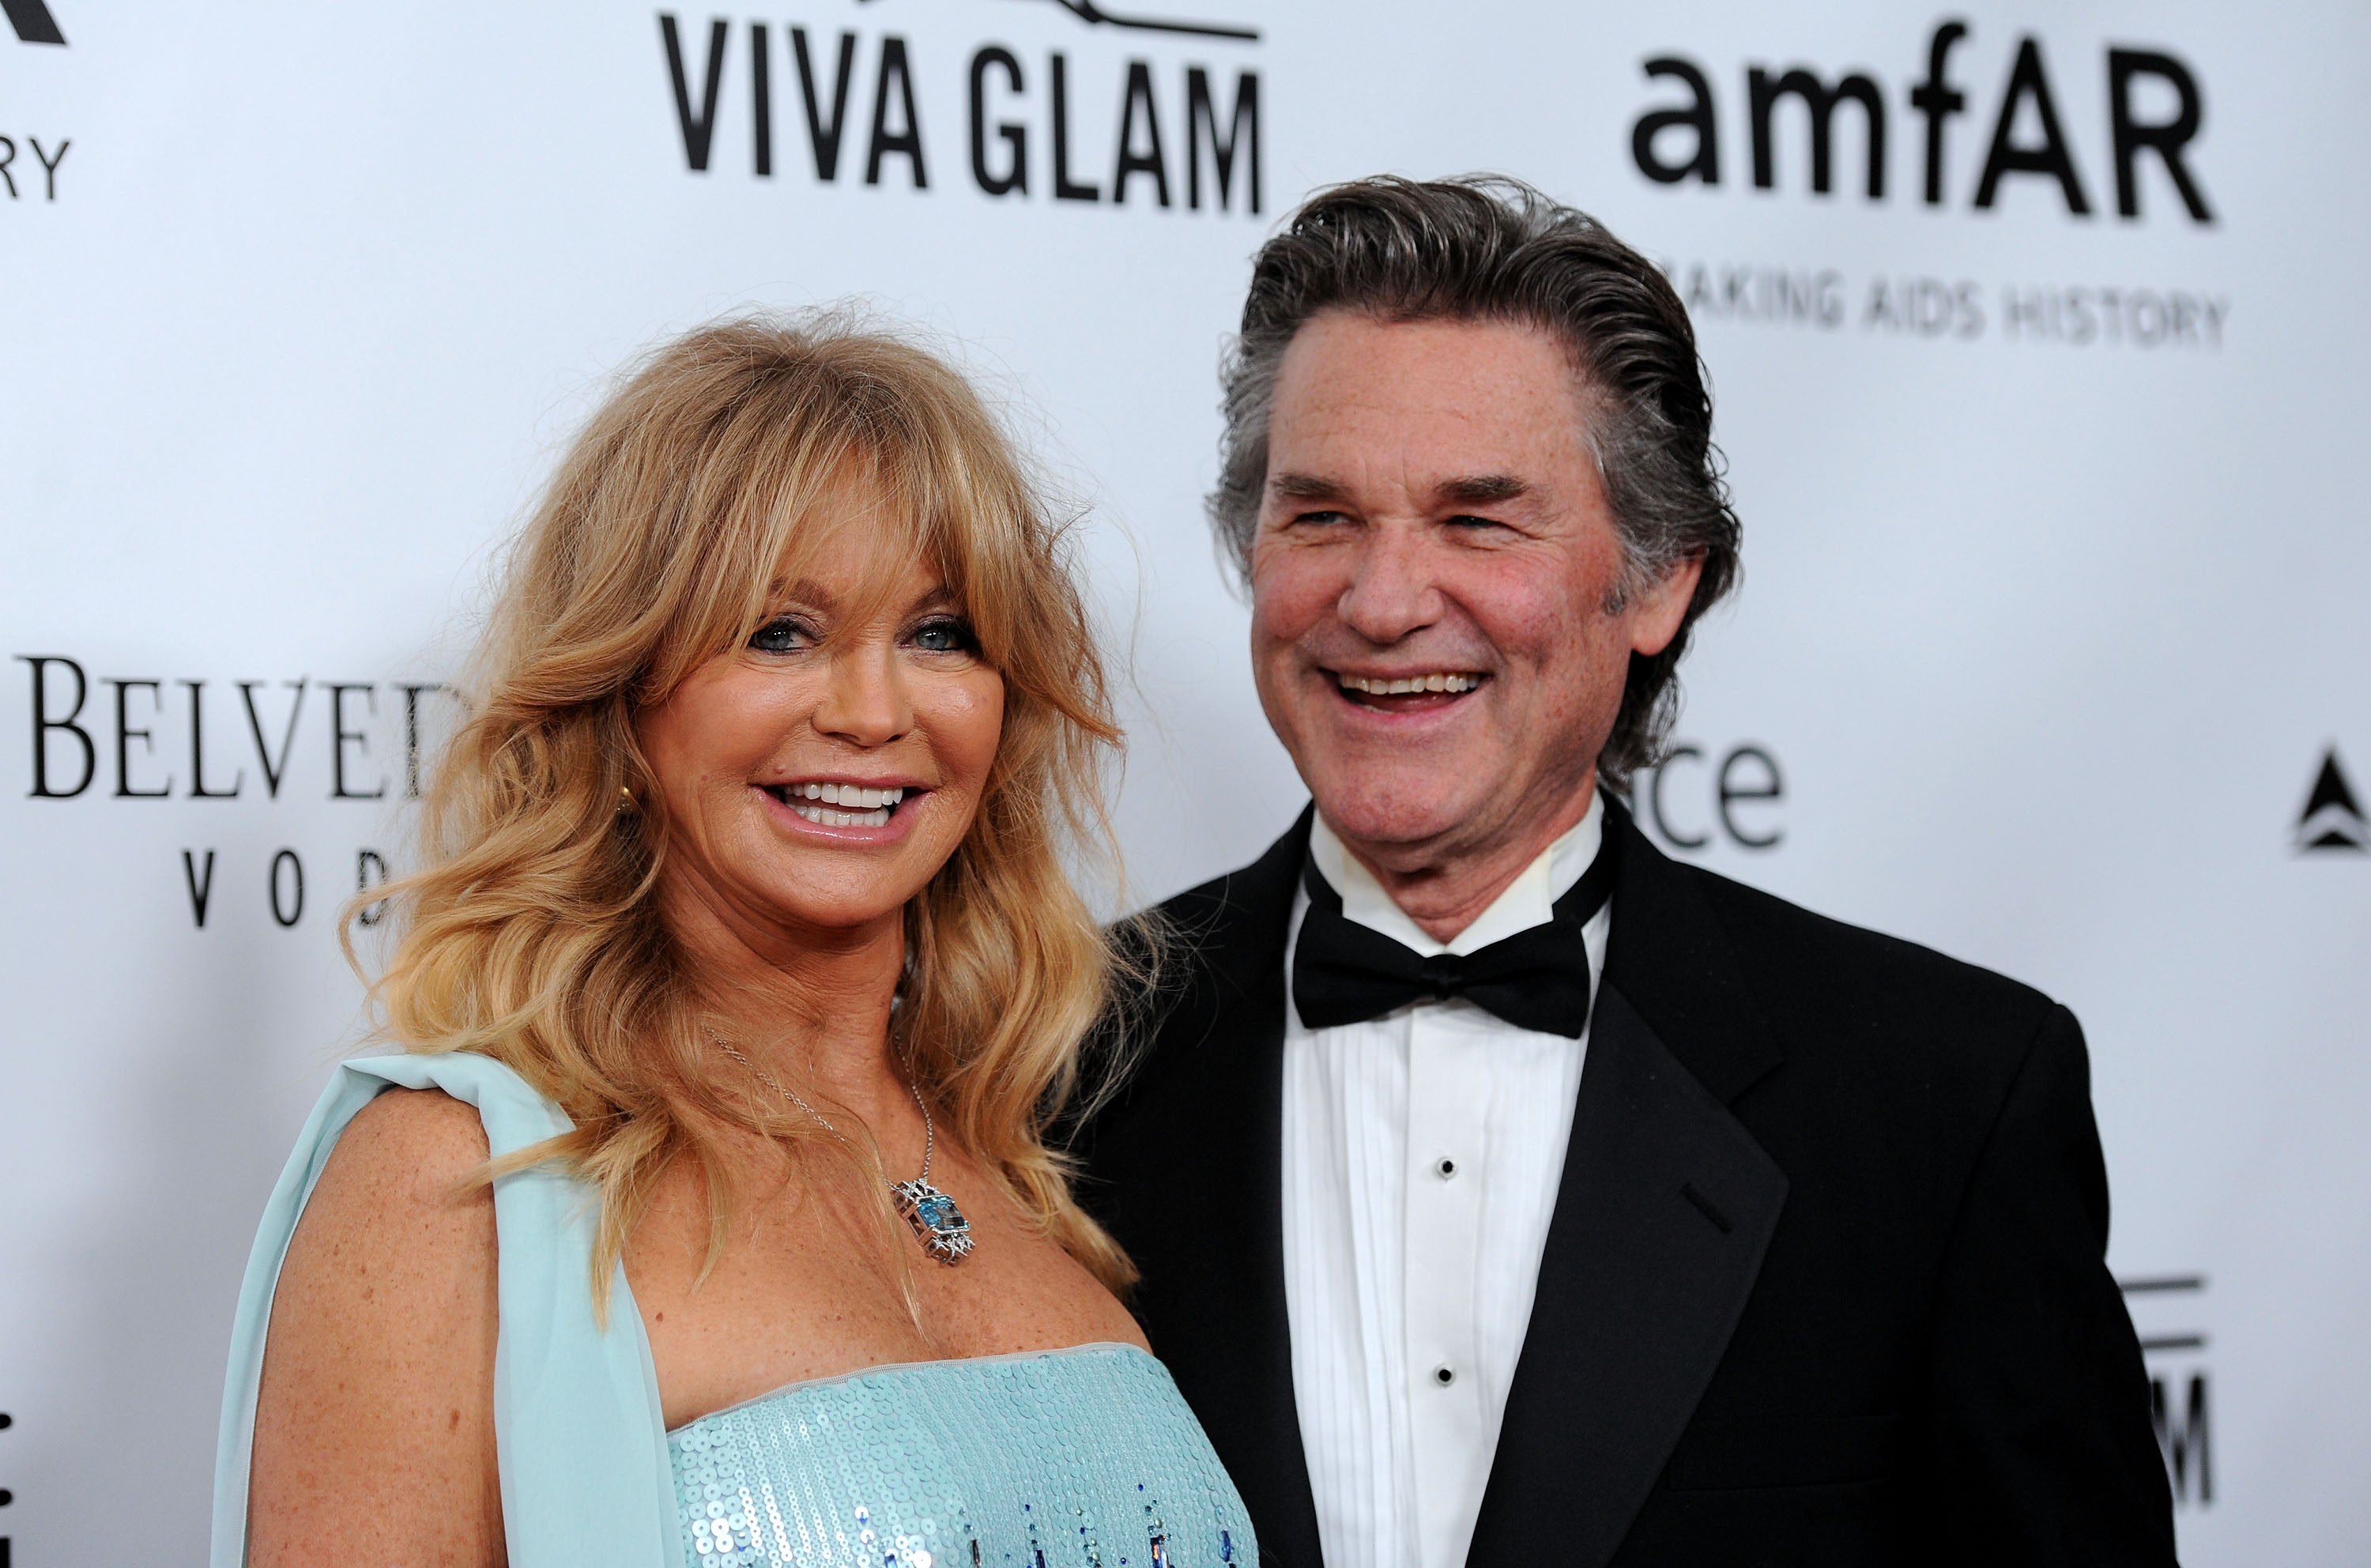 Goldie Hawn and actor Kurt Russell at amfAR The Foundation for AIDS 4th Annual Inspiration Gala in Hollywood, California on December 12, 2013 | Source: Getty Images